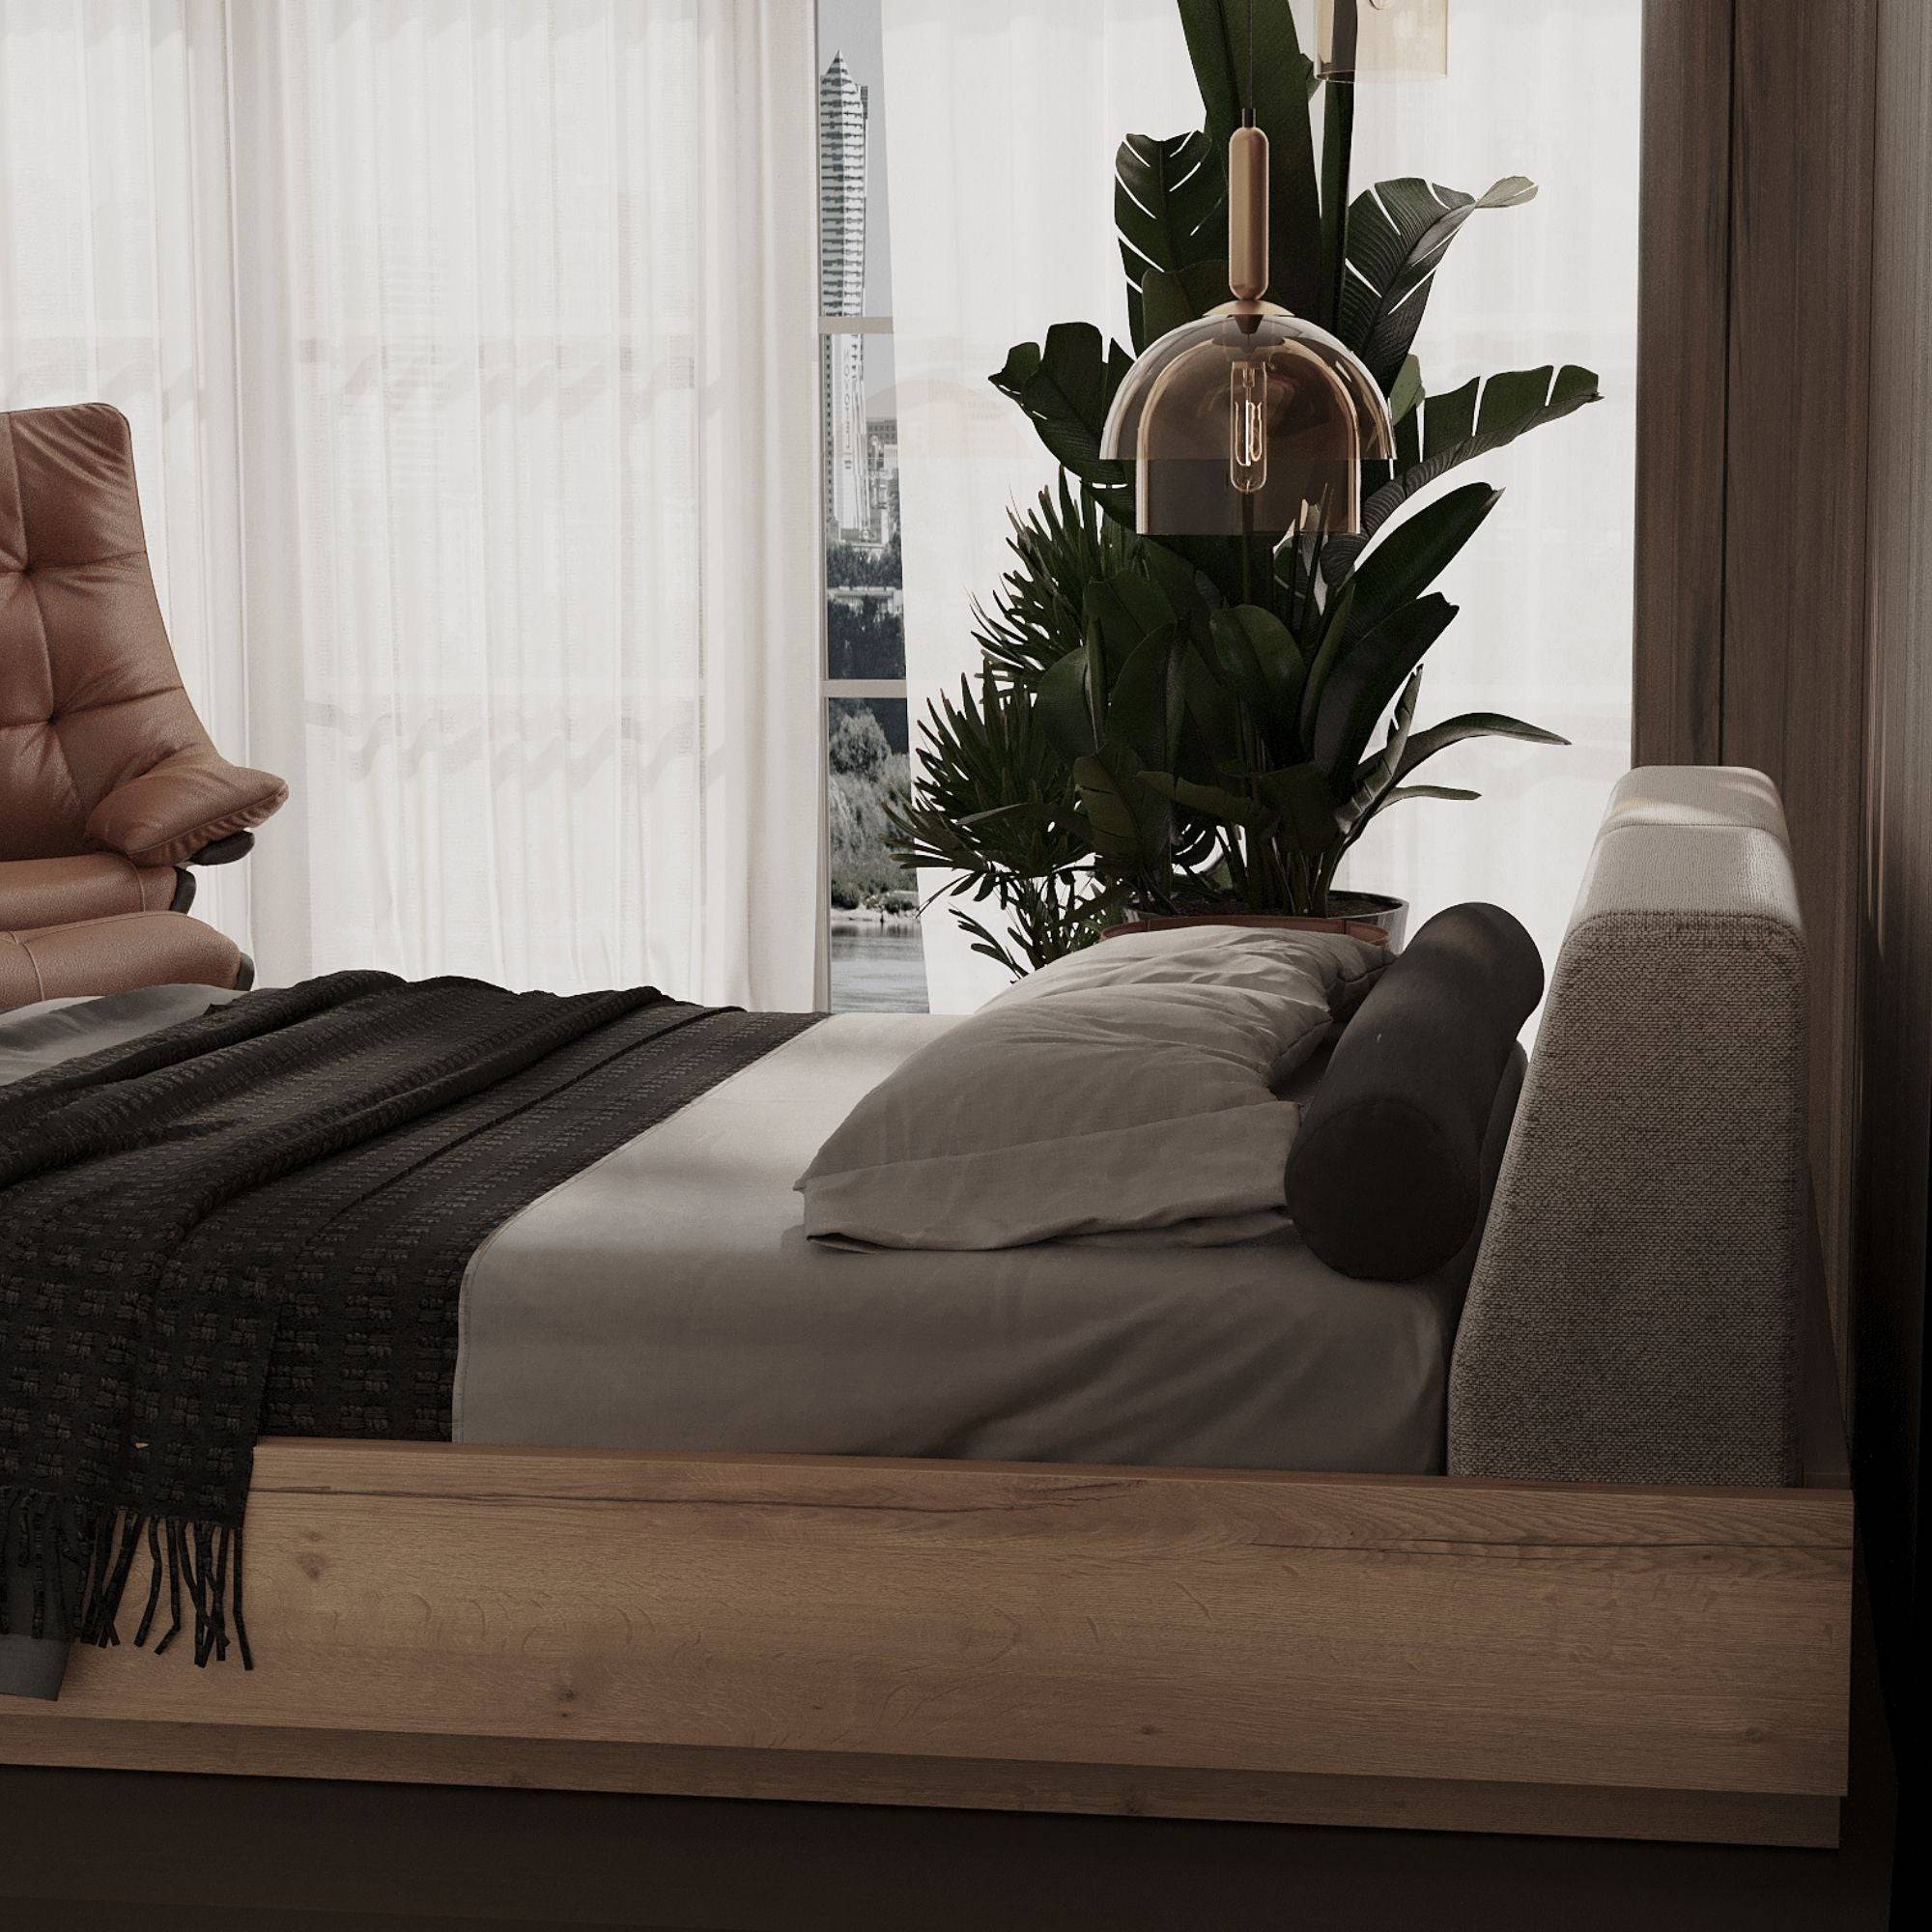 Vilo Bed - THAT COOL LIVING